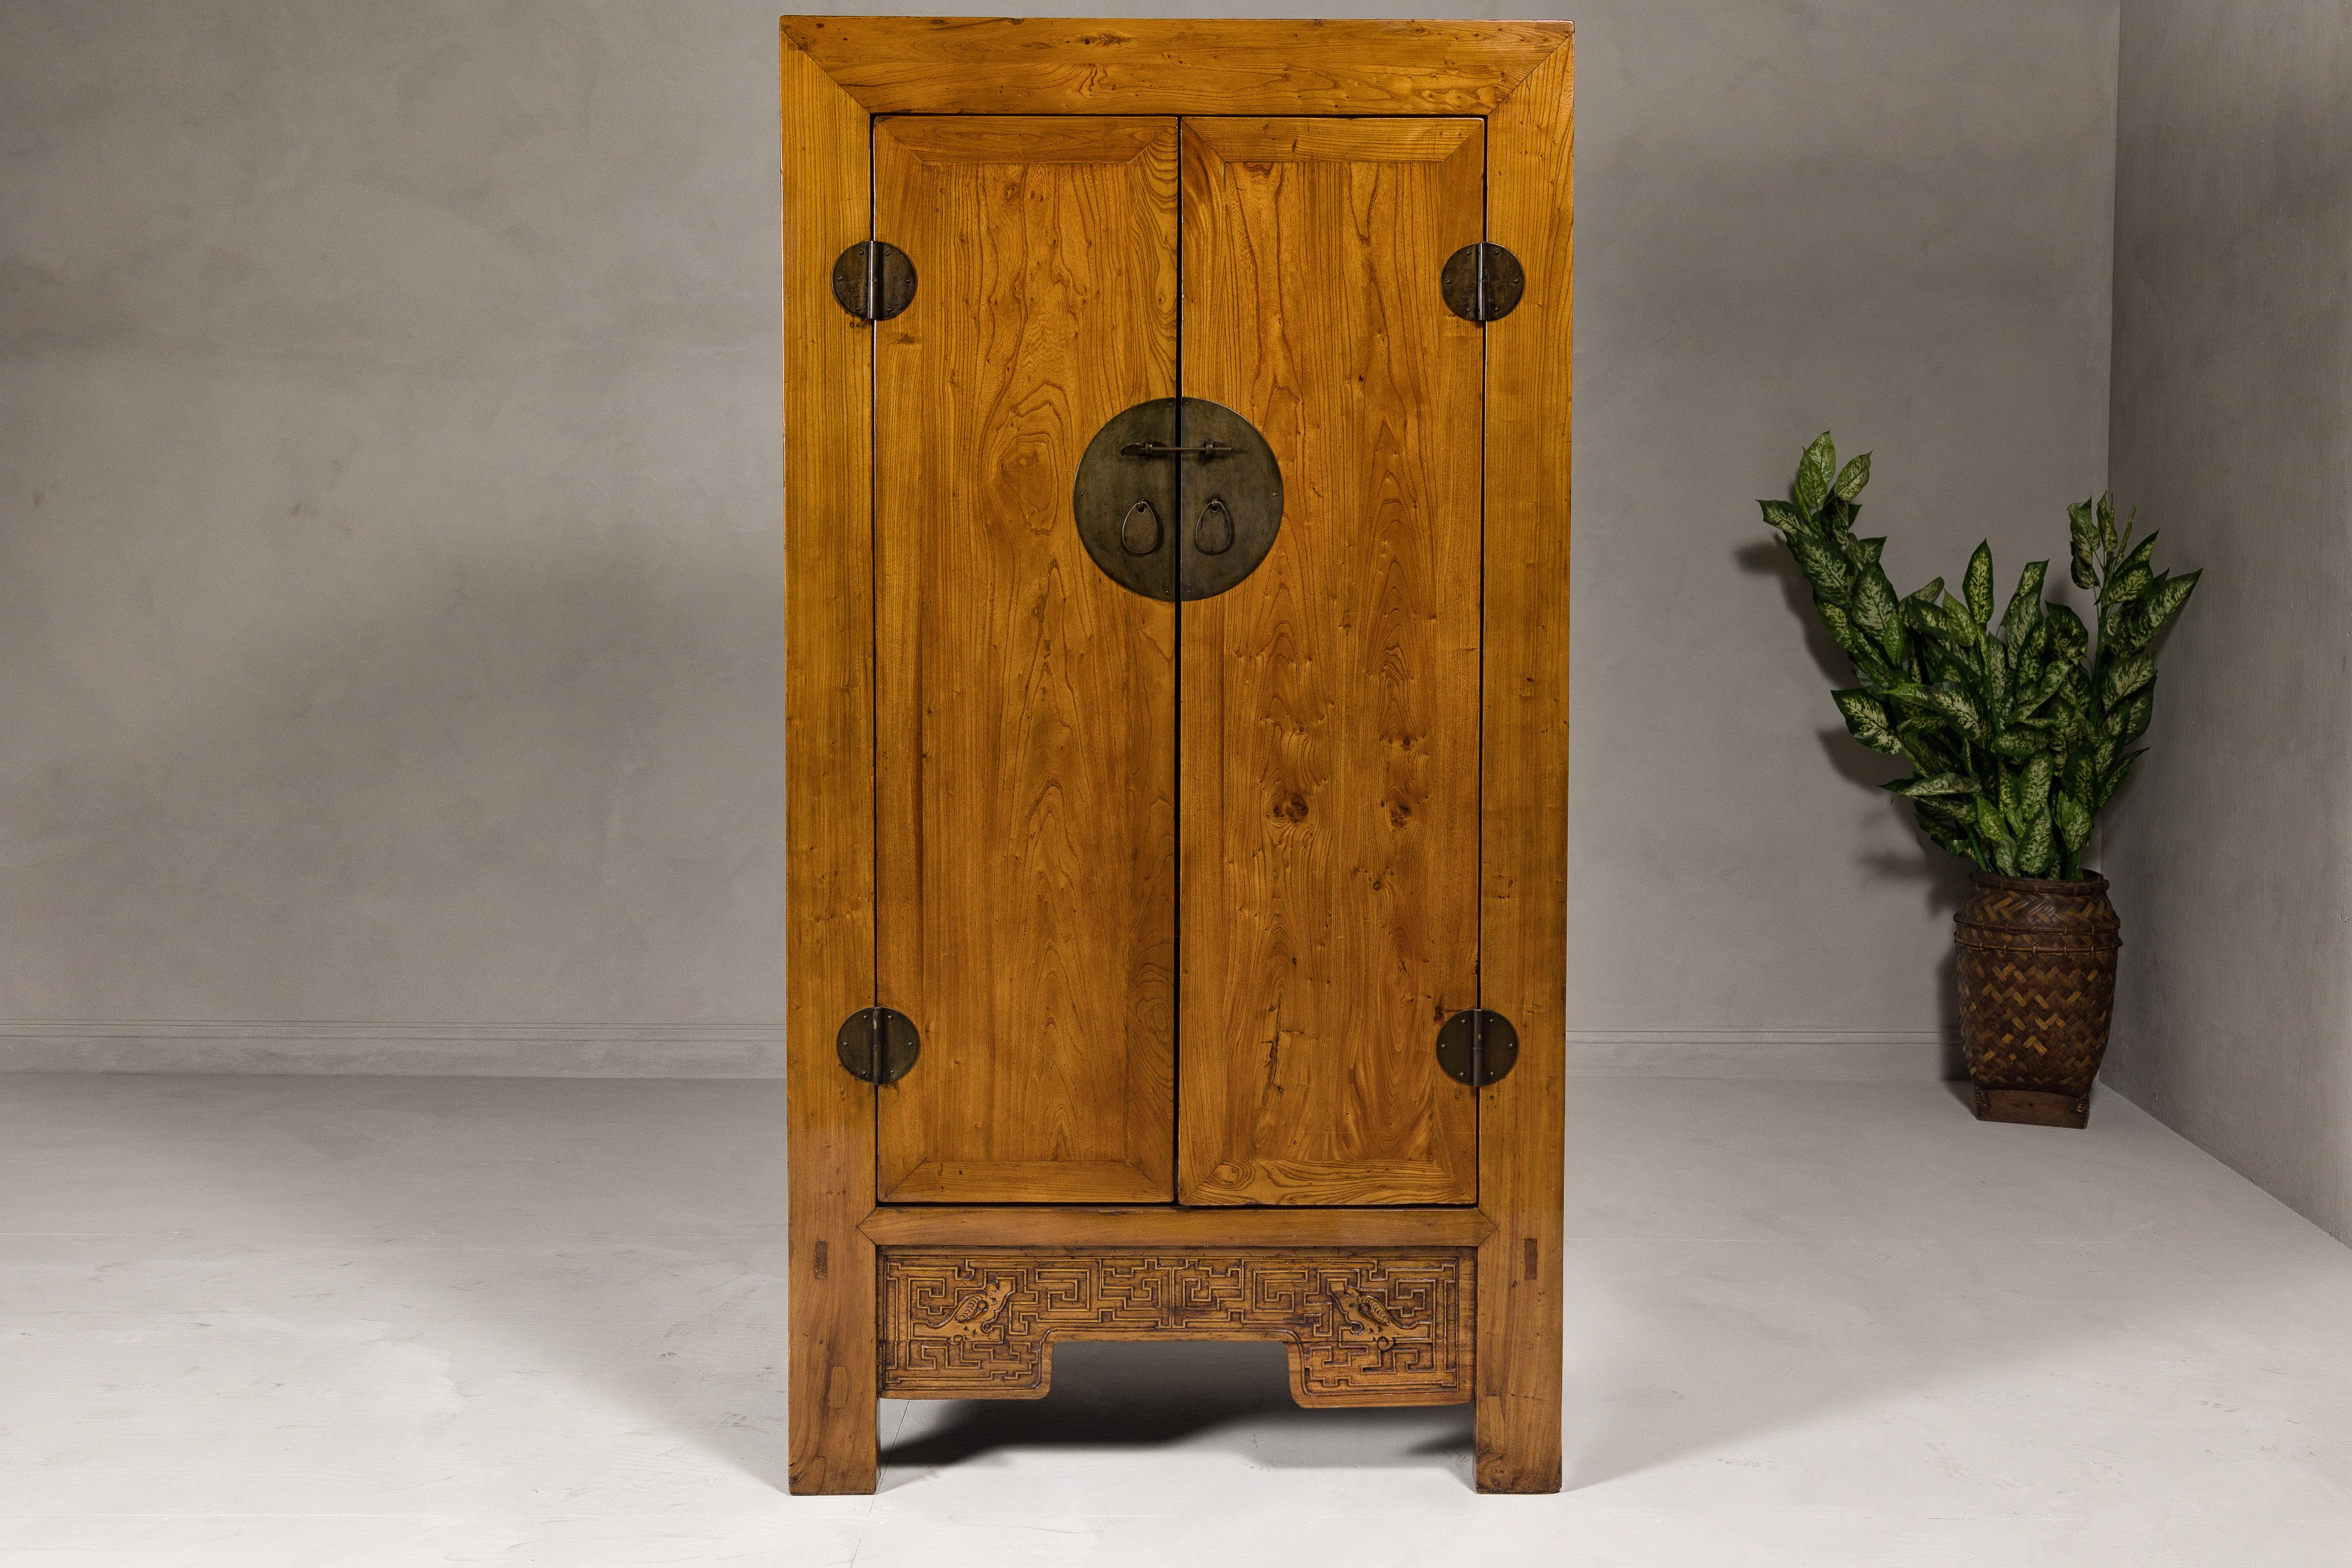 A large elmwood Qing Dynasty period cabinet from the 19th century with carved apron, round brass medallion hardware and two doors. This exquisite large elmwood cabinet, hailing from the Qing Dynasty period of the 19th century, is a masterpiece of